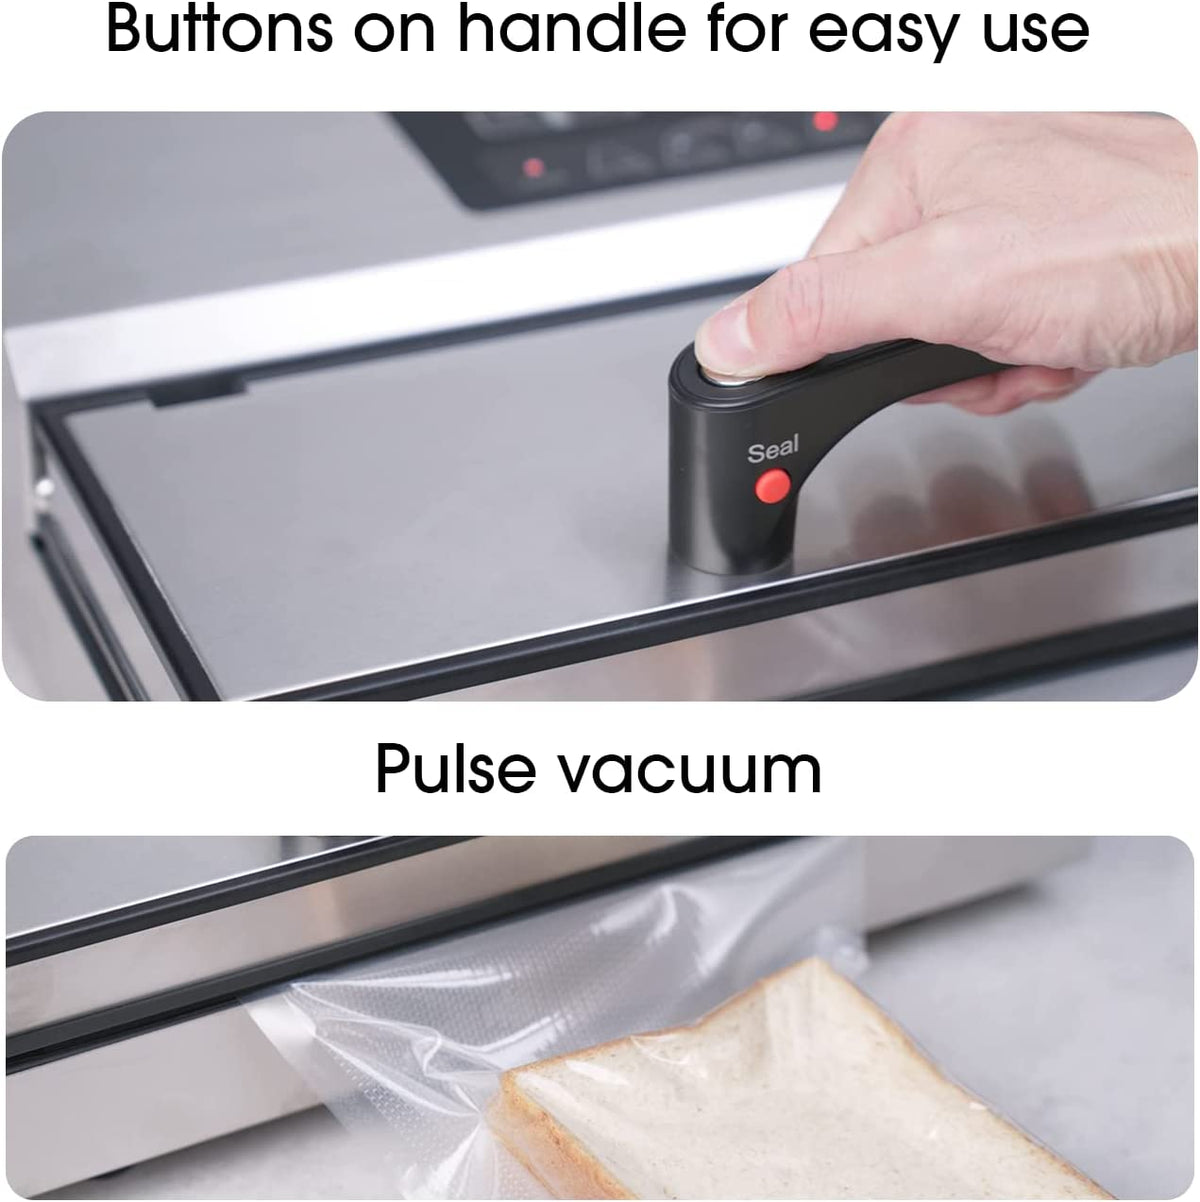 A picture showing the pulse vacuum button on the handle of a vacuum sealer.